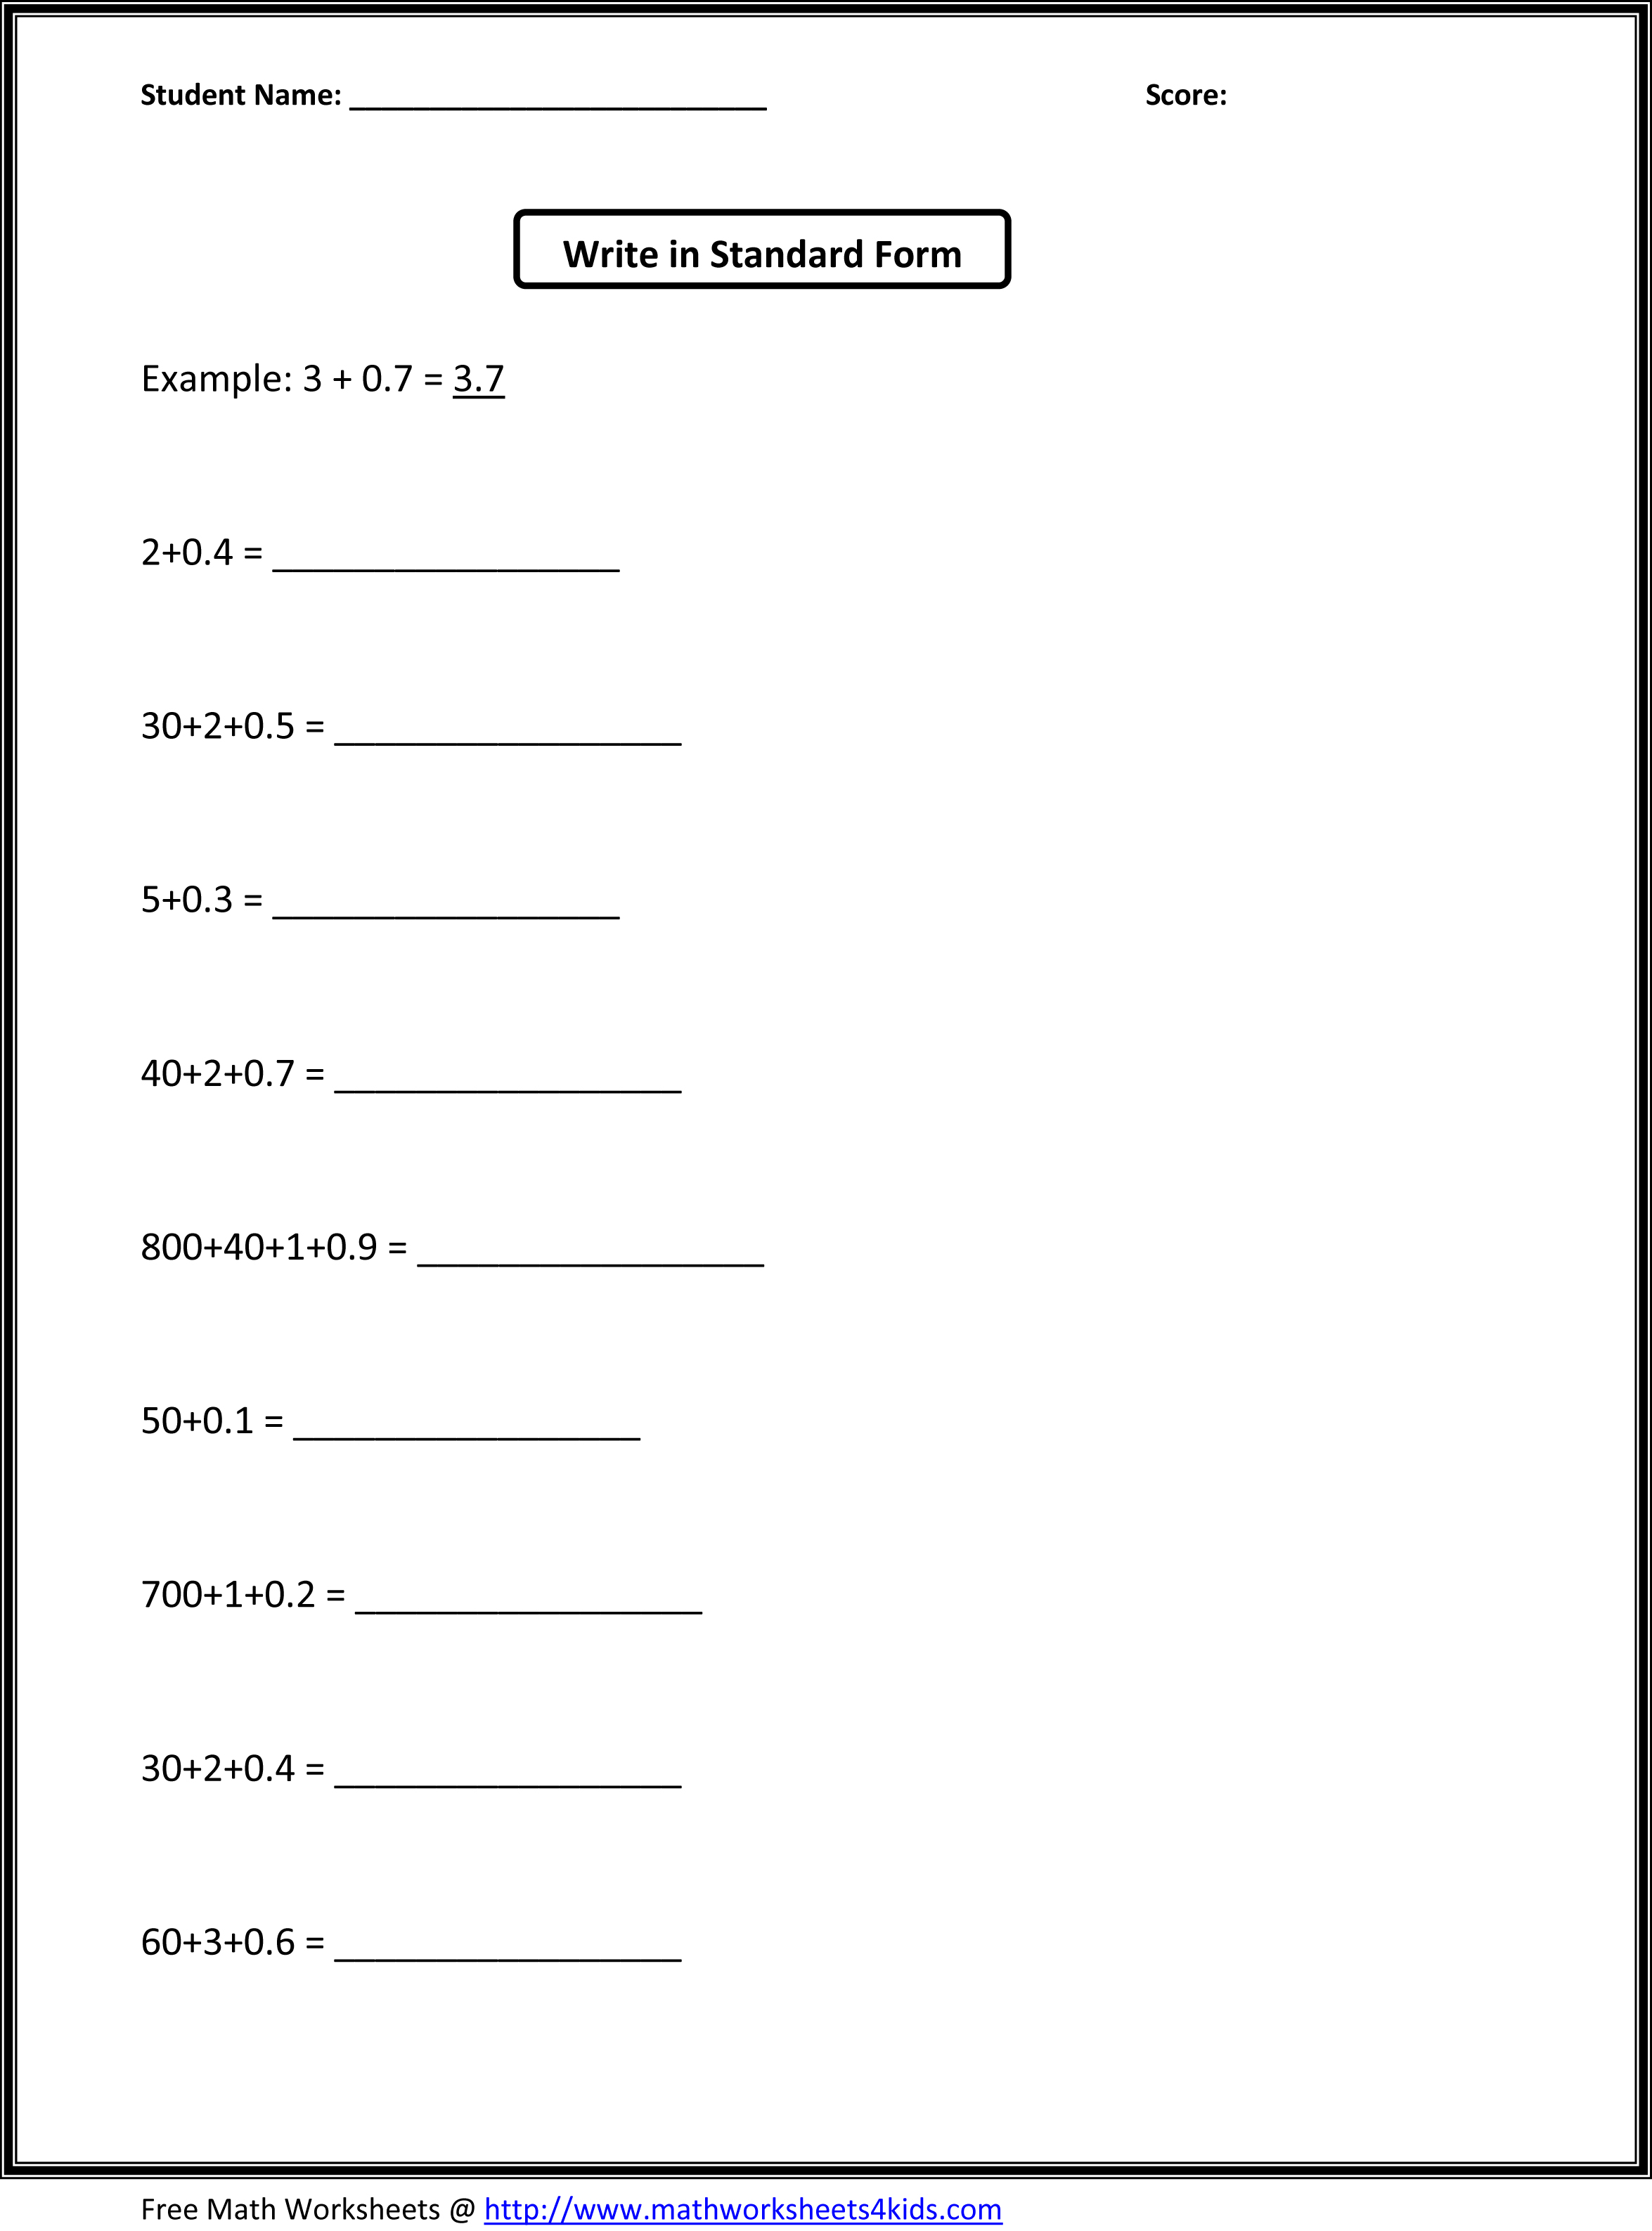 16 Best Images of Standard Form Worksheets 2nd Grade - Numbers in